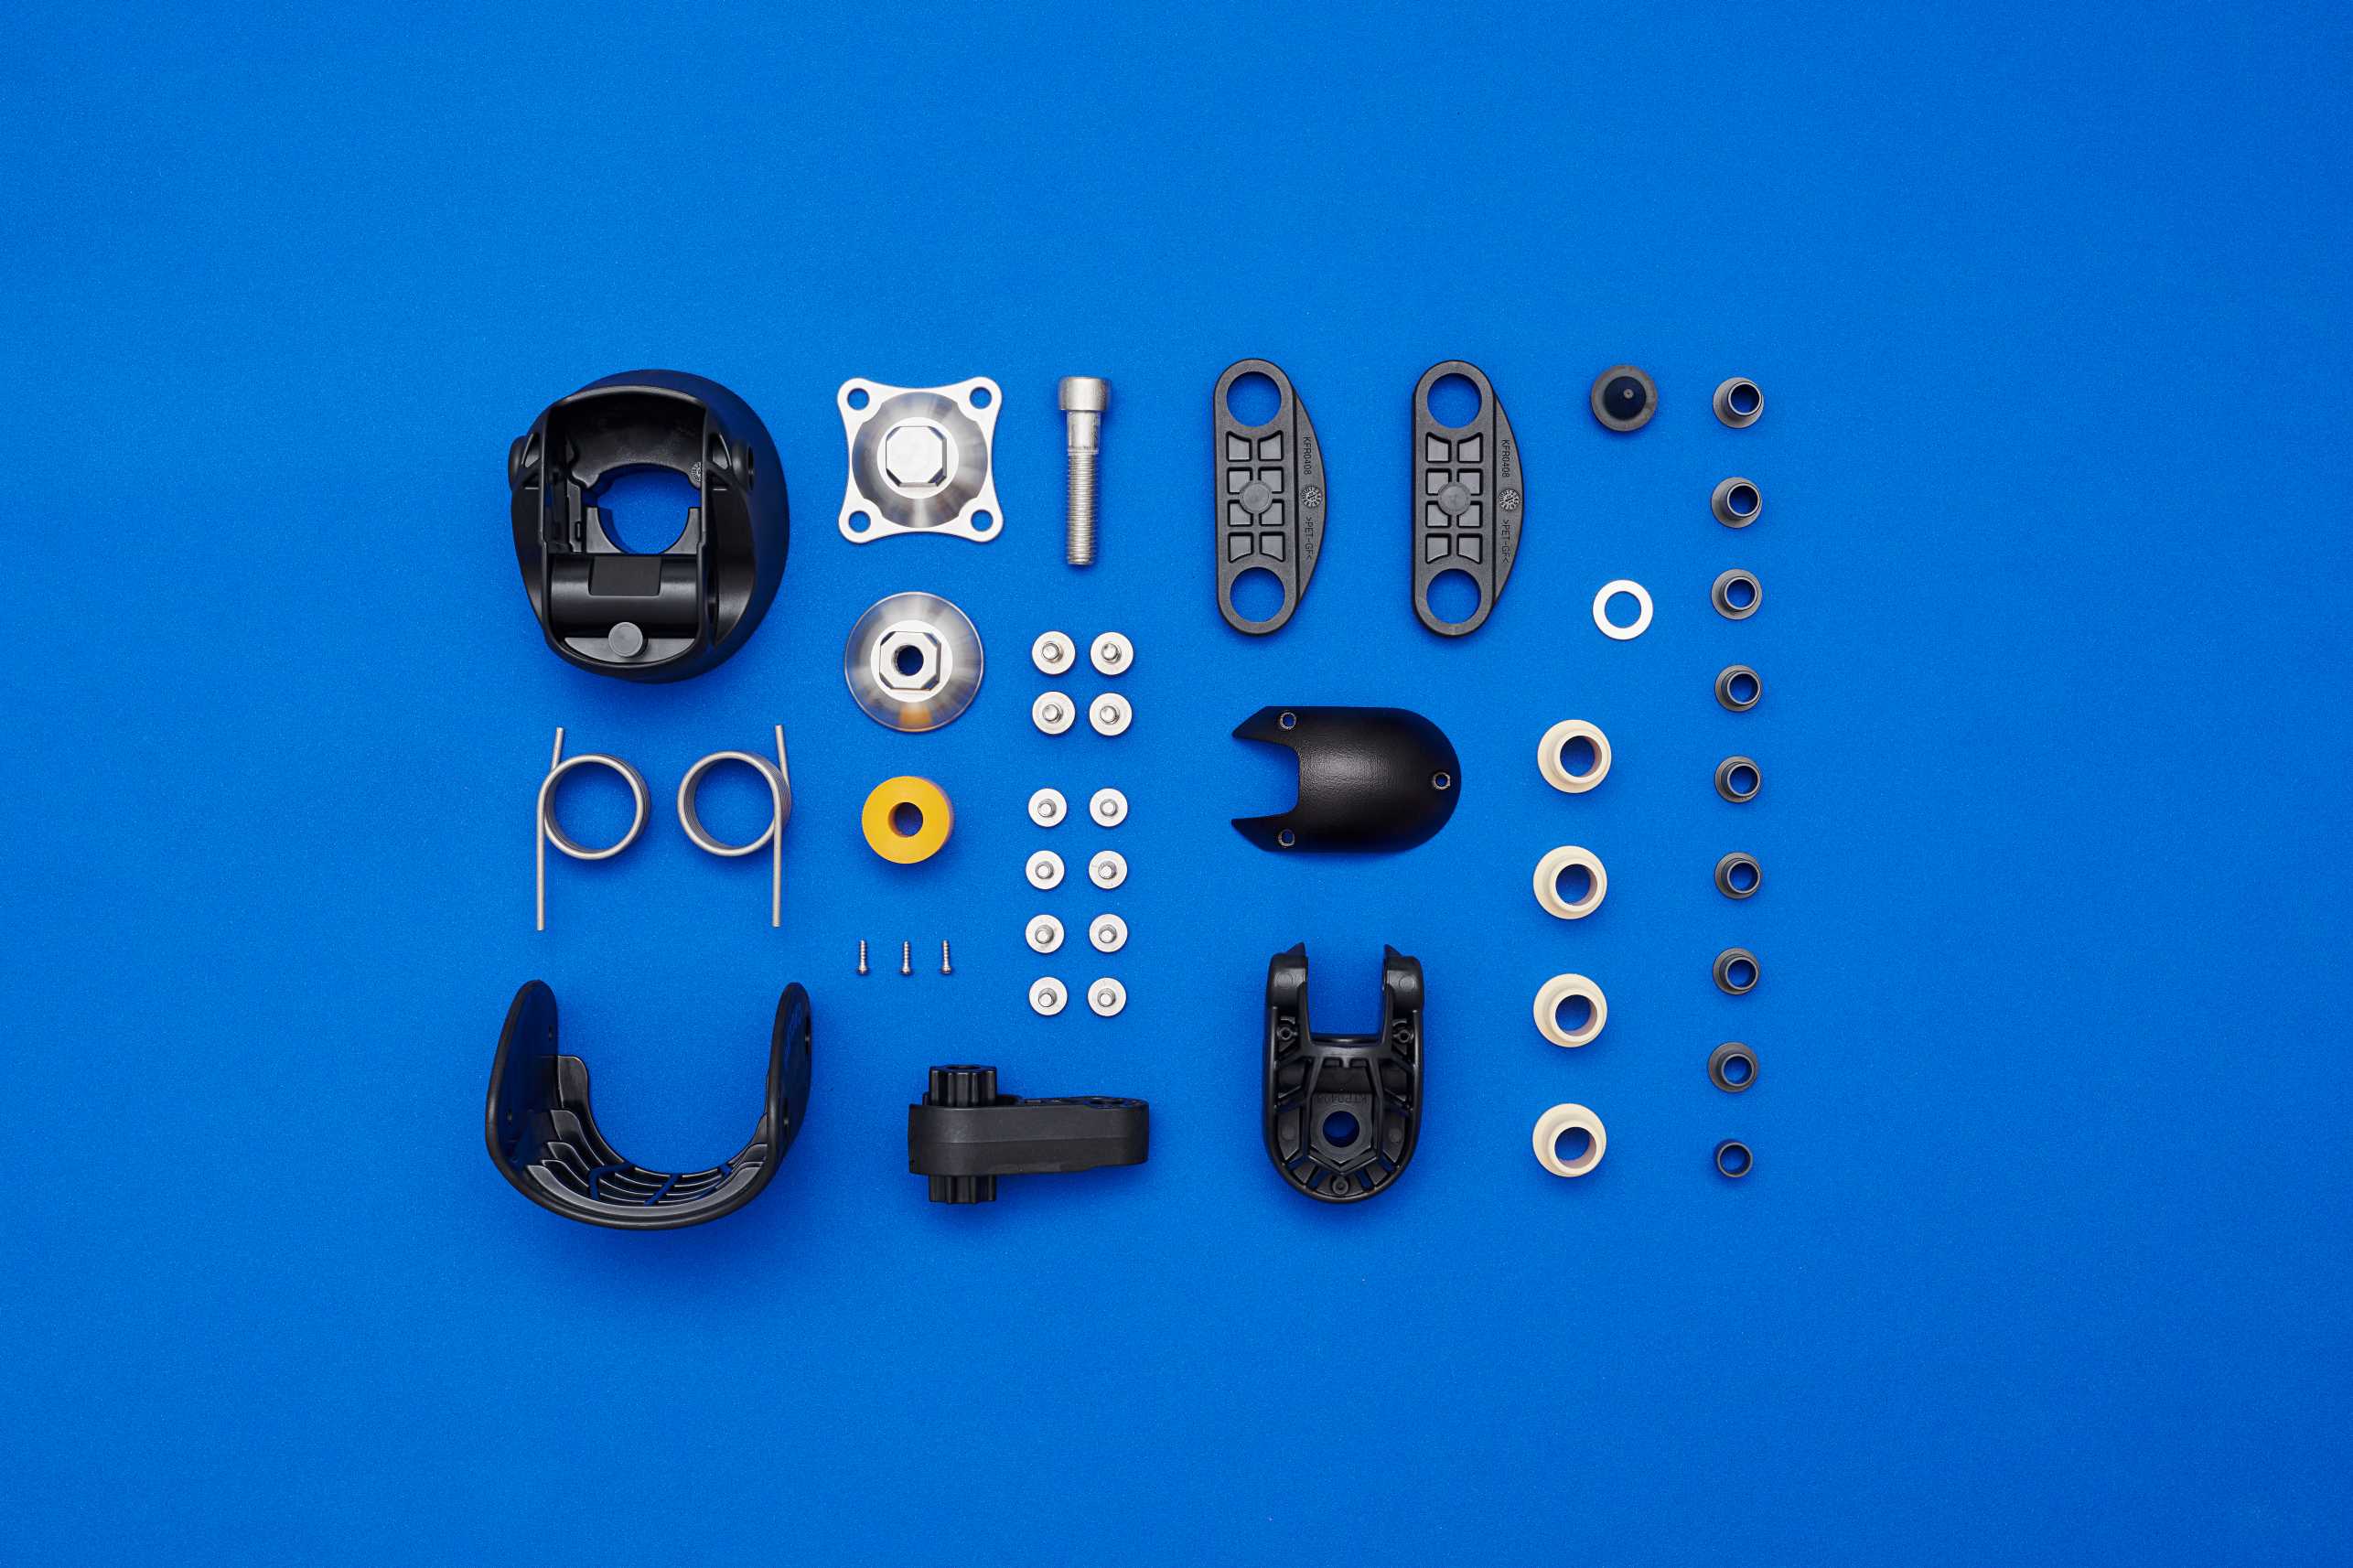 Circleg parts are pictured in front of a blue background.